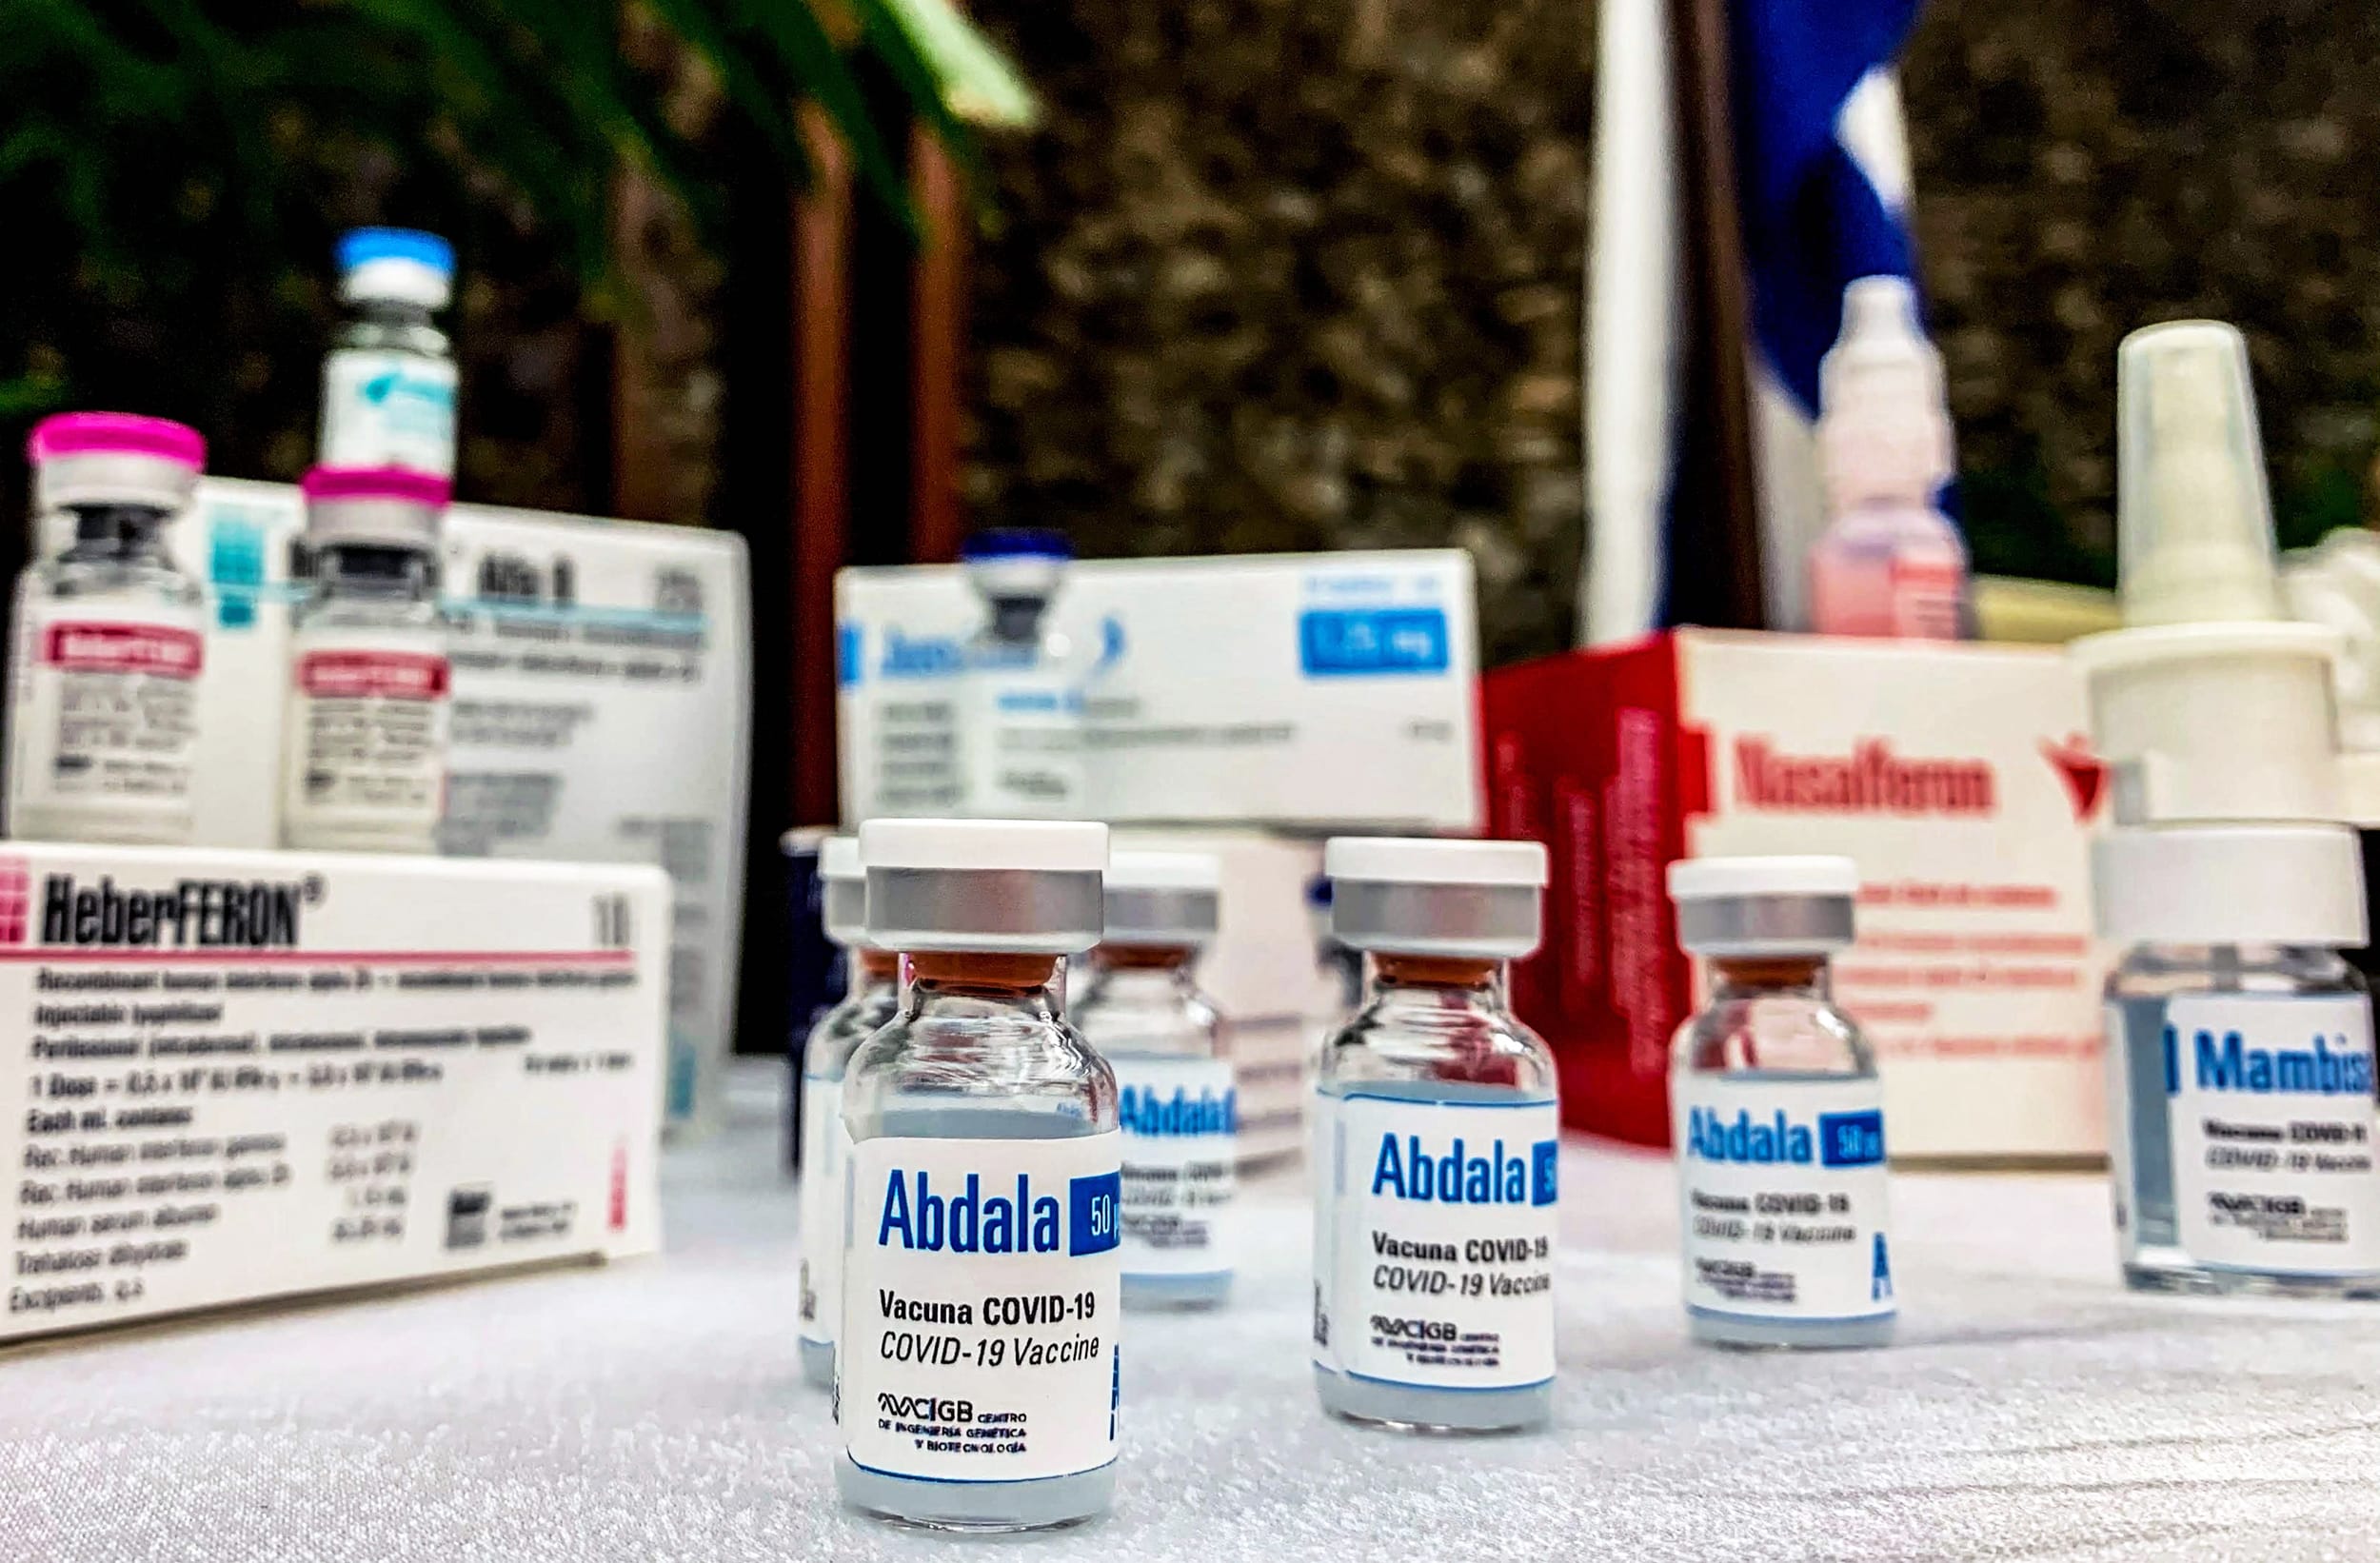 “Abdala”; a Cuban vaccine 92.28% effective against Coronavirus.. Here is the story behind the name